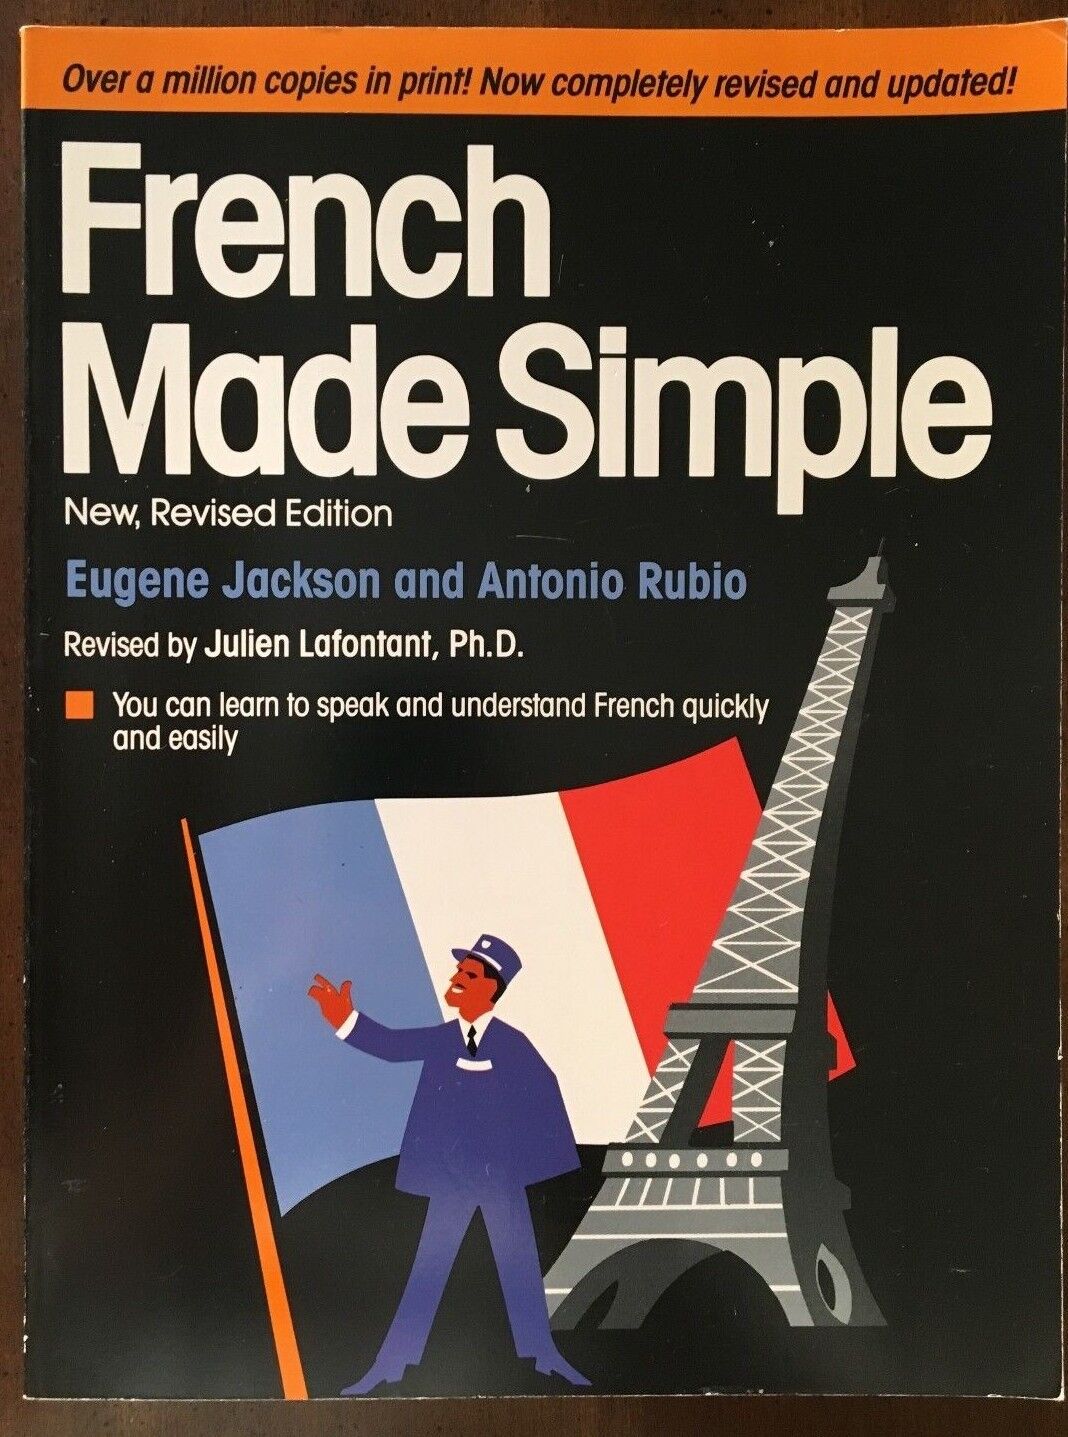 FRENCH Essentials French, Learn French the Fast & Easy Way, French Made Simple Barrons and others does not apply - фотография #9